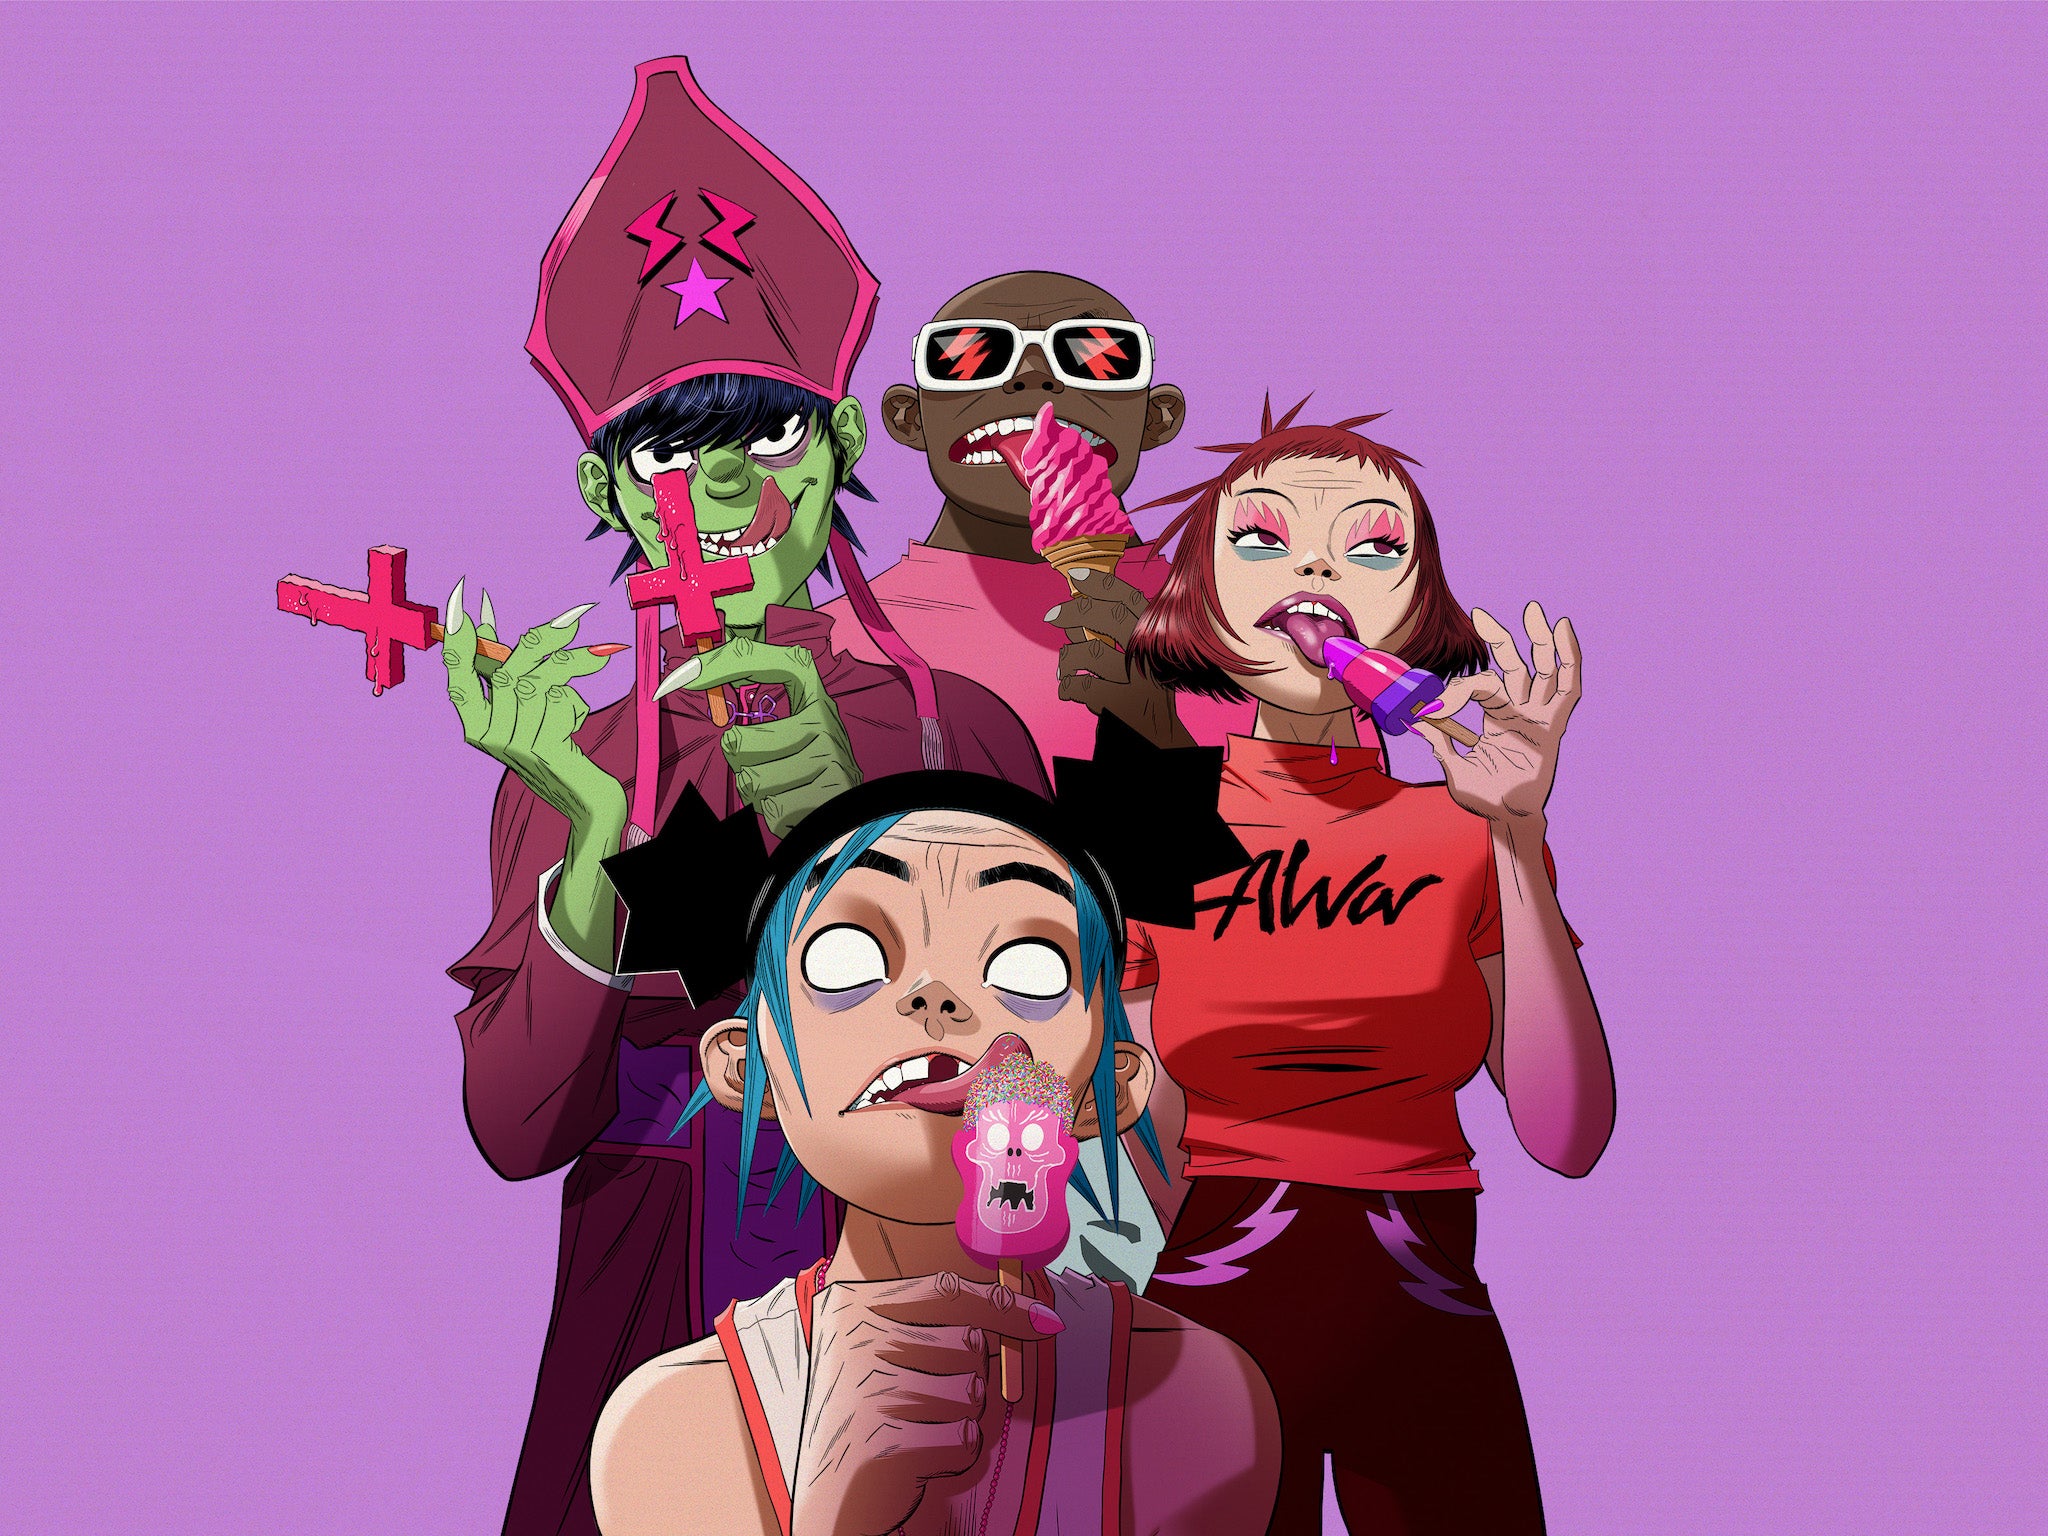 Gorillaz have always been an apocalypse party of an act, but now, they’re laughing again